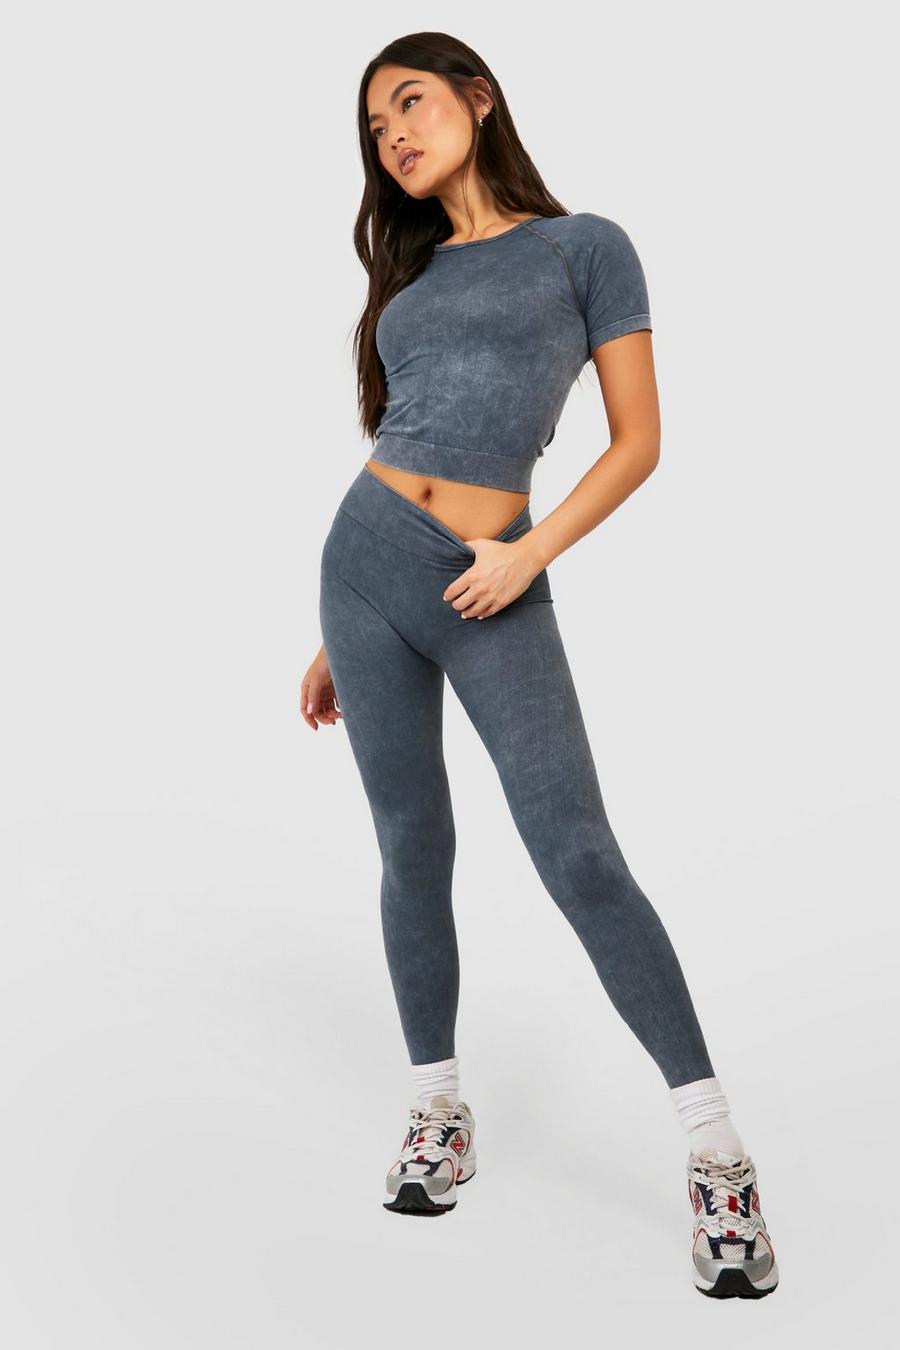 Ruched Top and Leggings Set – Bad Peach Fitness